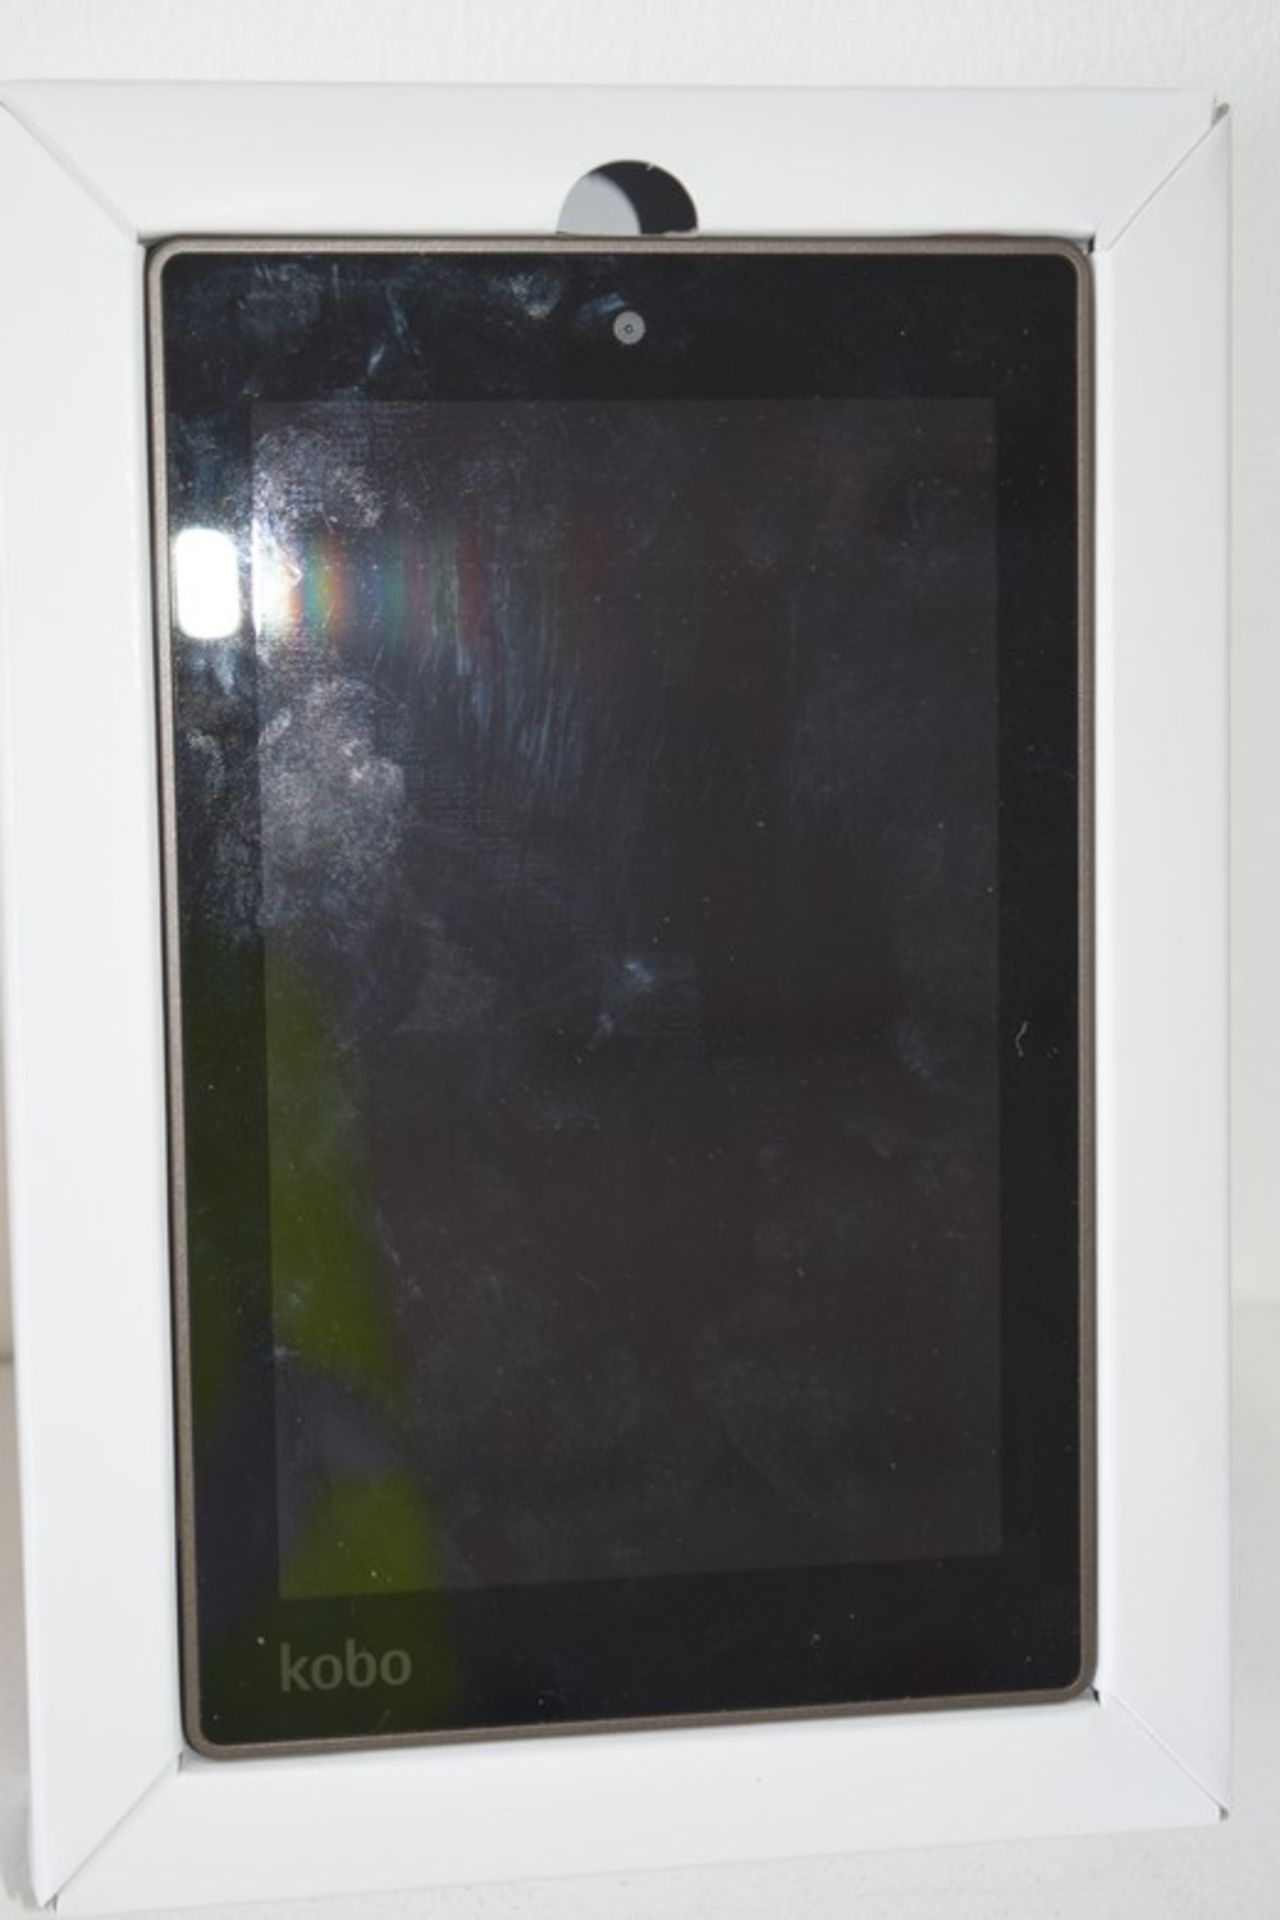 1 x BOXED KOBO ARC 7HD TABLET RRP £120 PALLET (1502) (AC) *PLEASE NOTE THAT THE BID PRICE IS